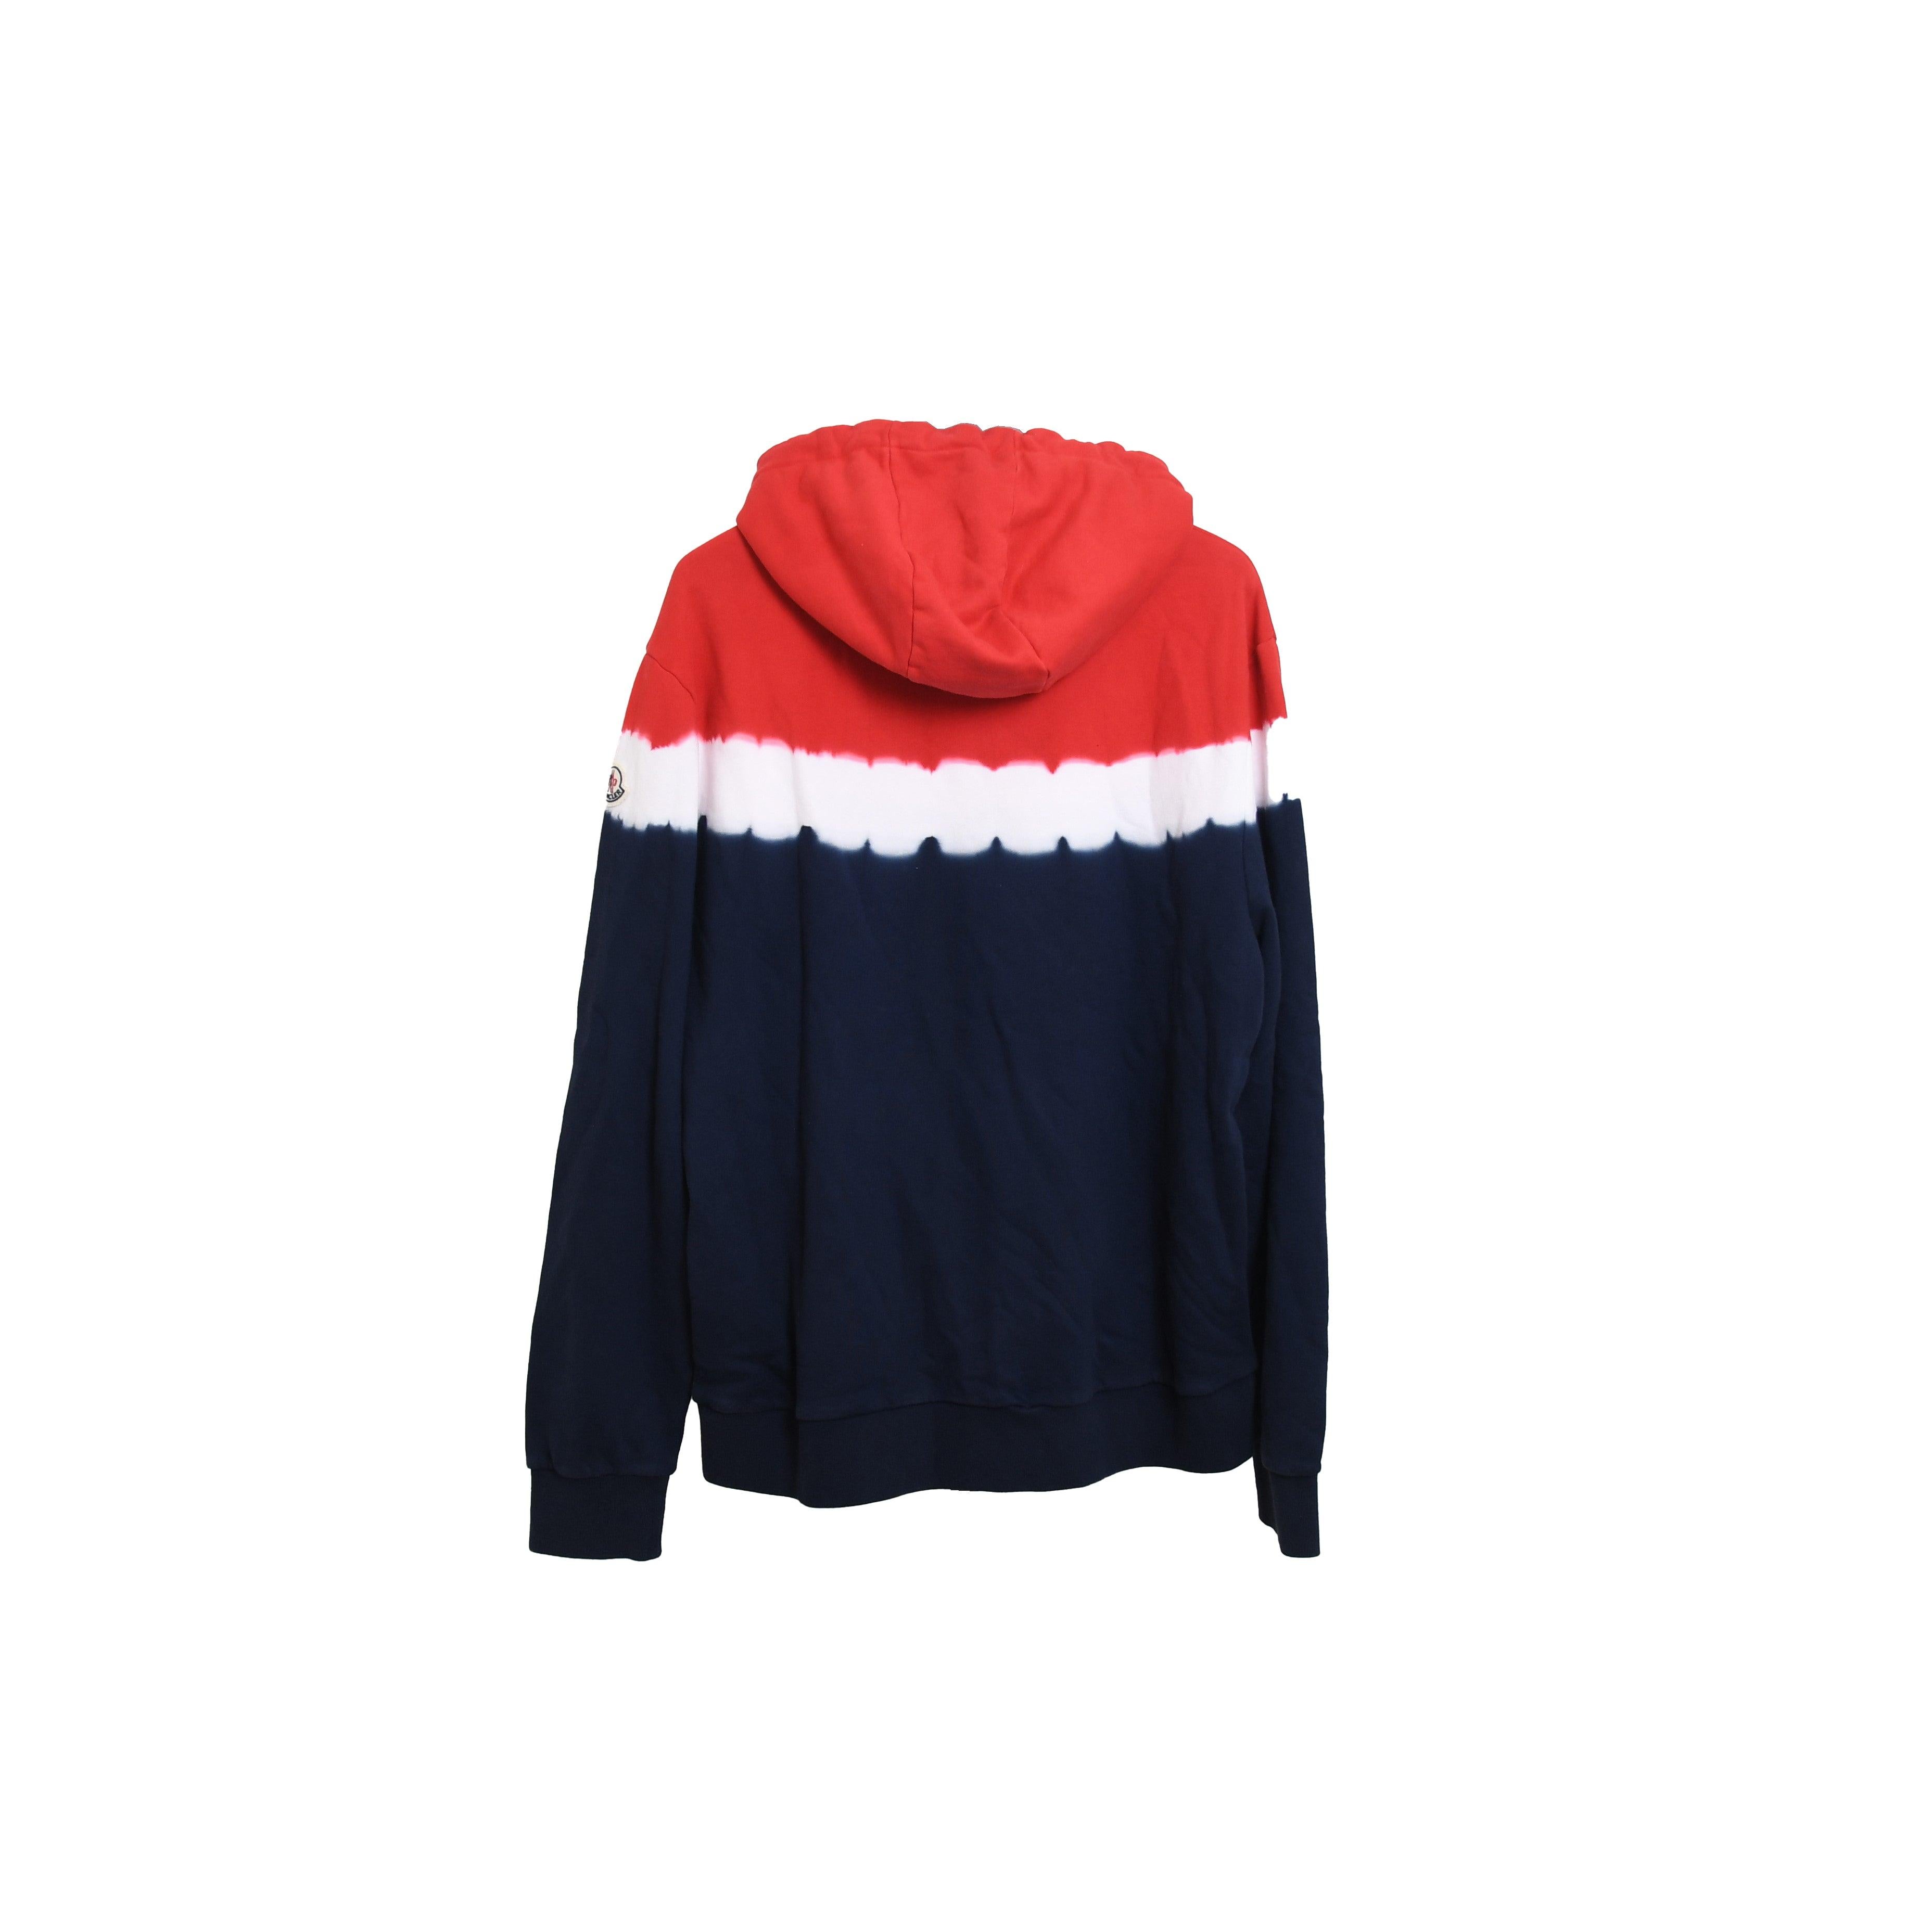 moncler jacket red white and black